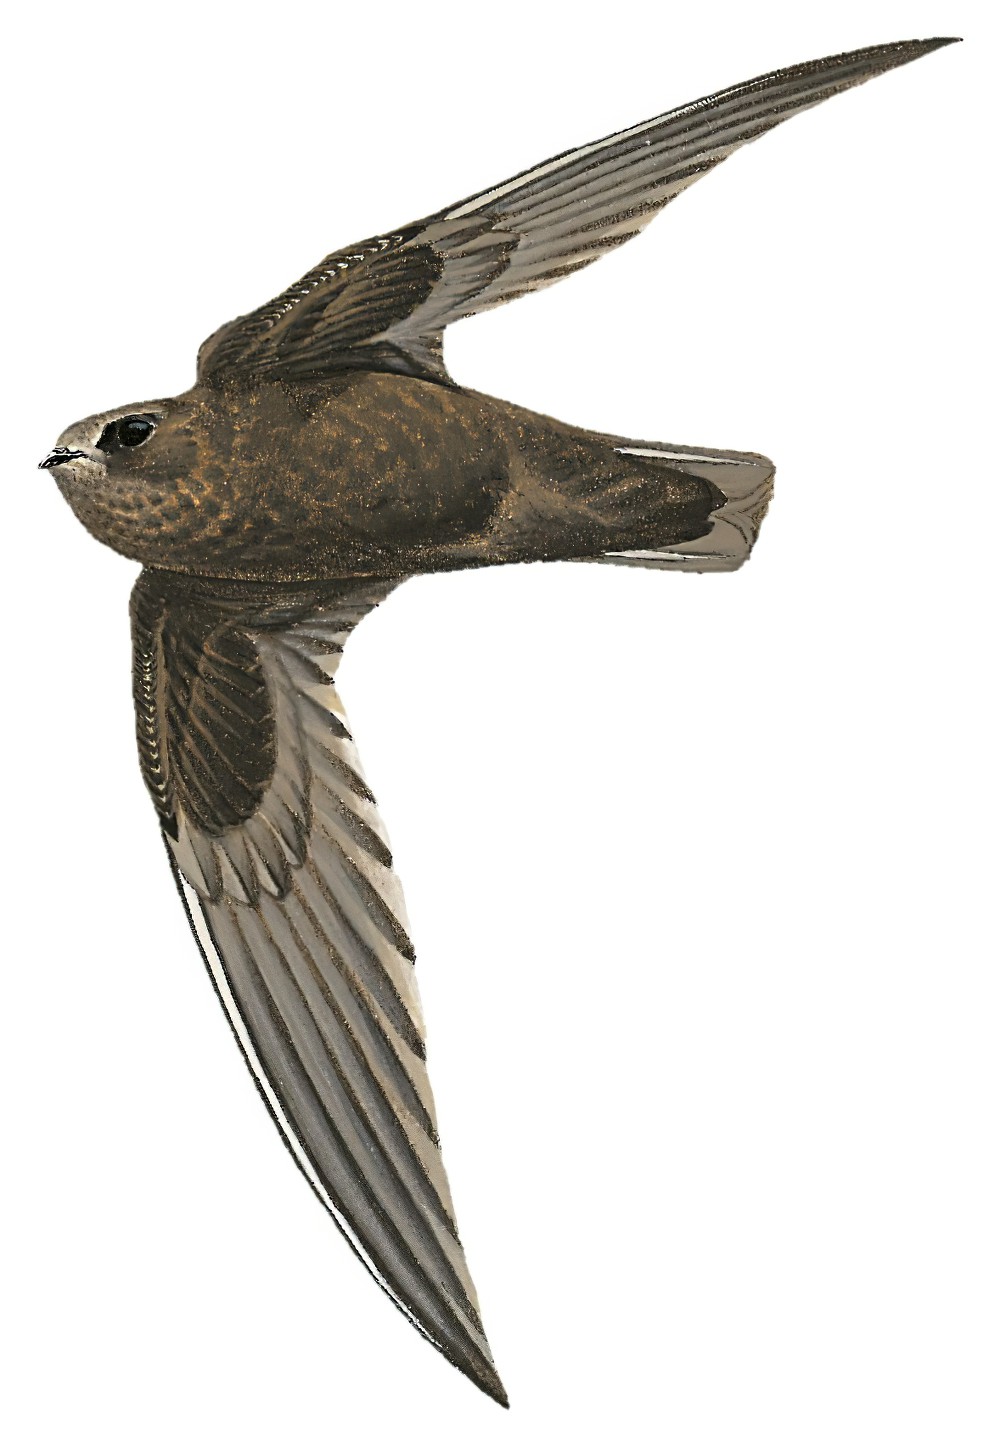 White-fronted Swift / Cypseloides storeri